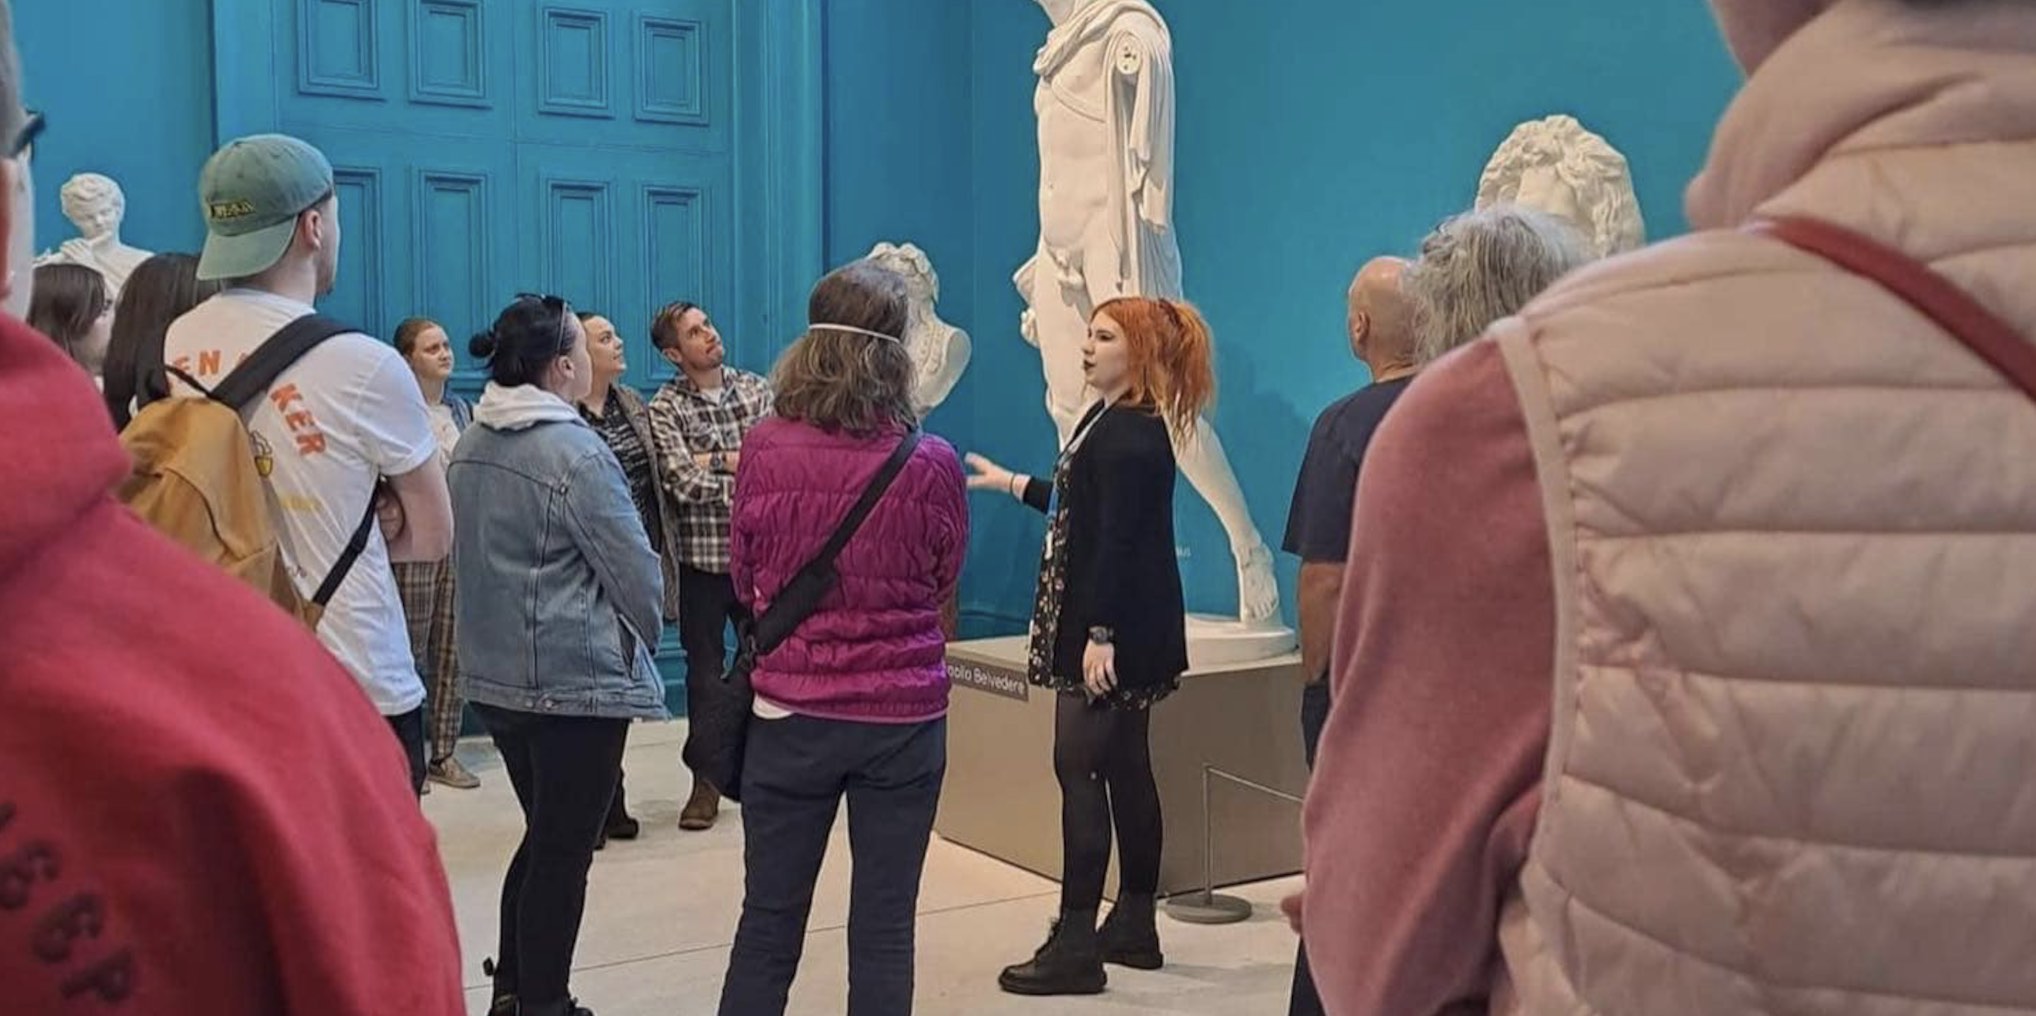 A tour guide is standing in front of a tall, white, stone statue in a blue room talking to a group of people.